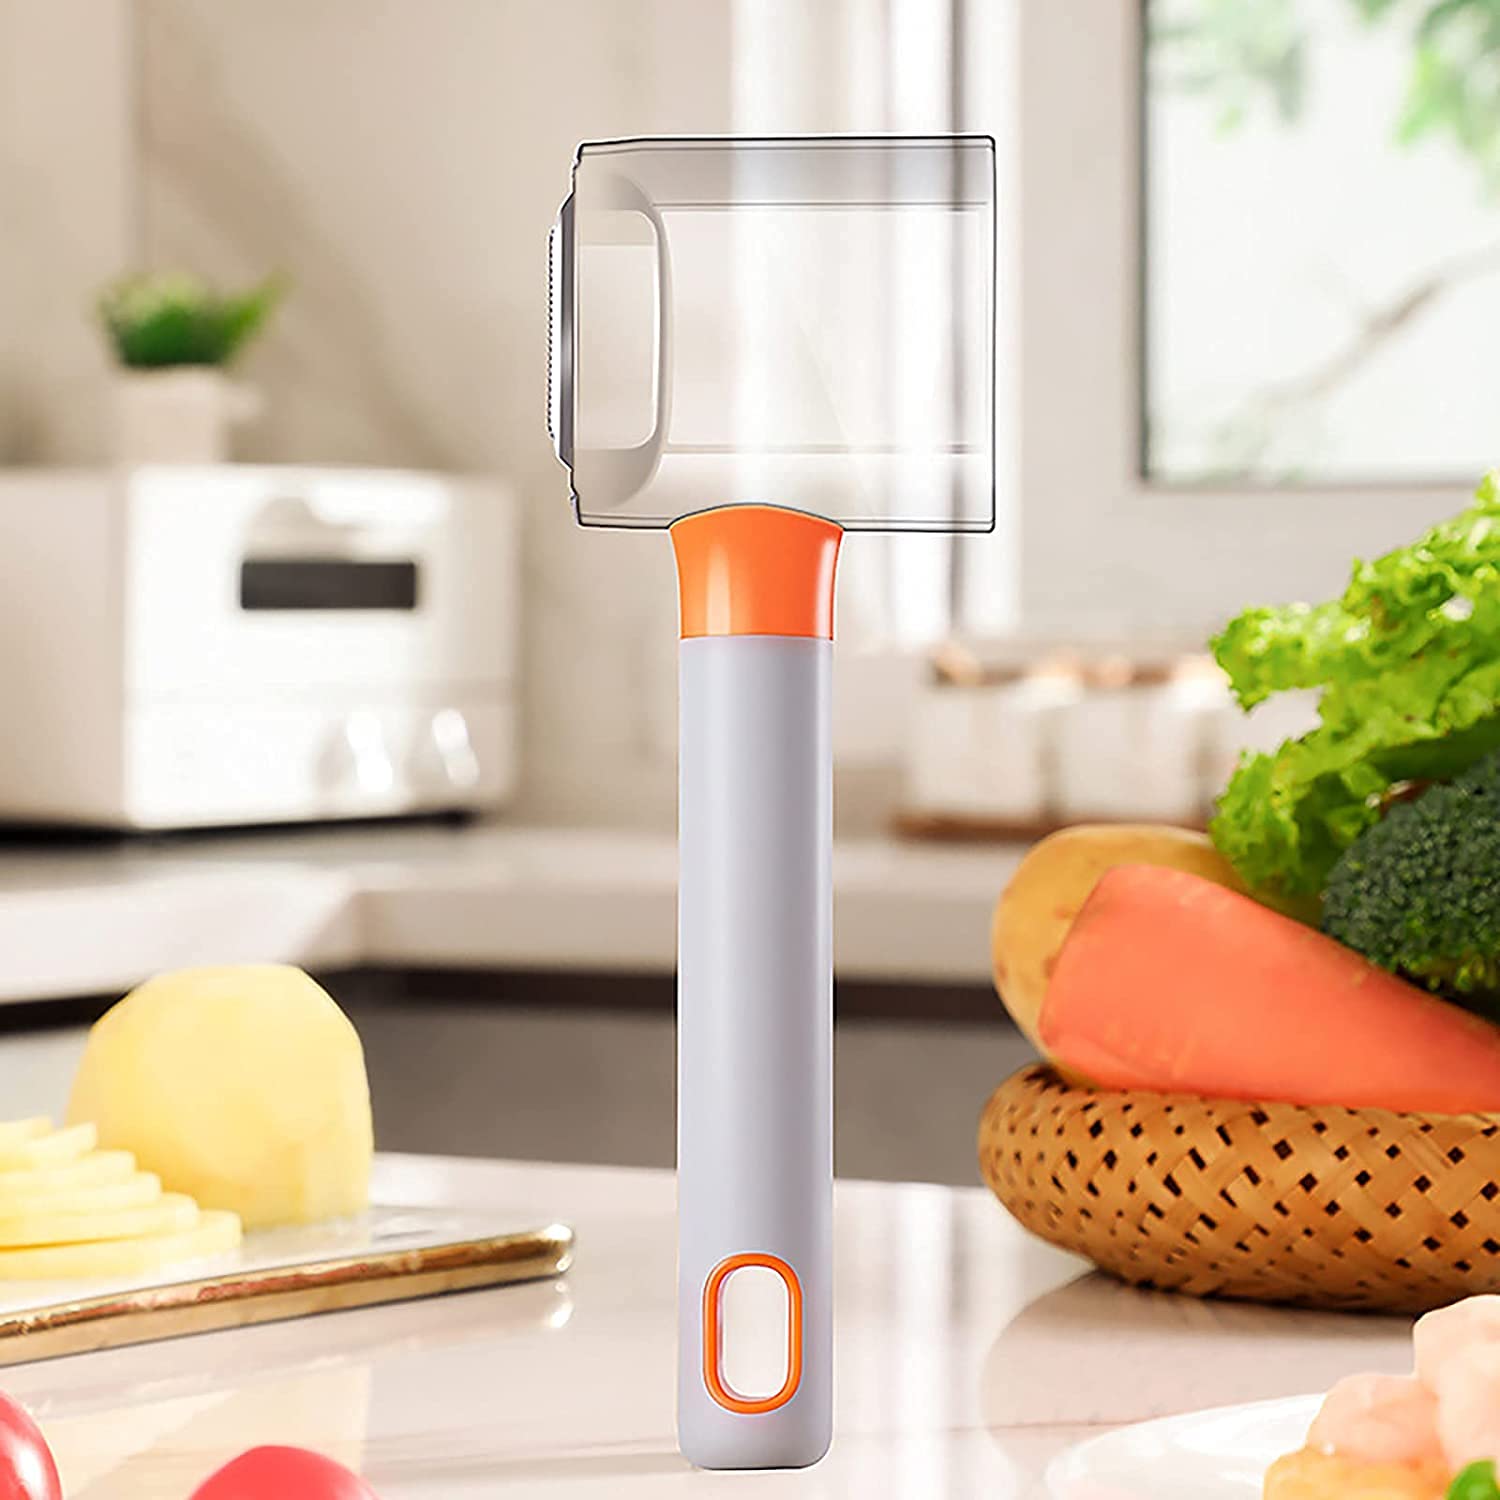 Vegetable and fruit peeler with long handle and equipped with a storage tank for peels